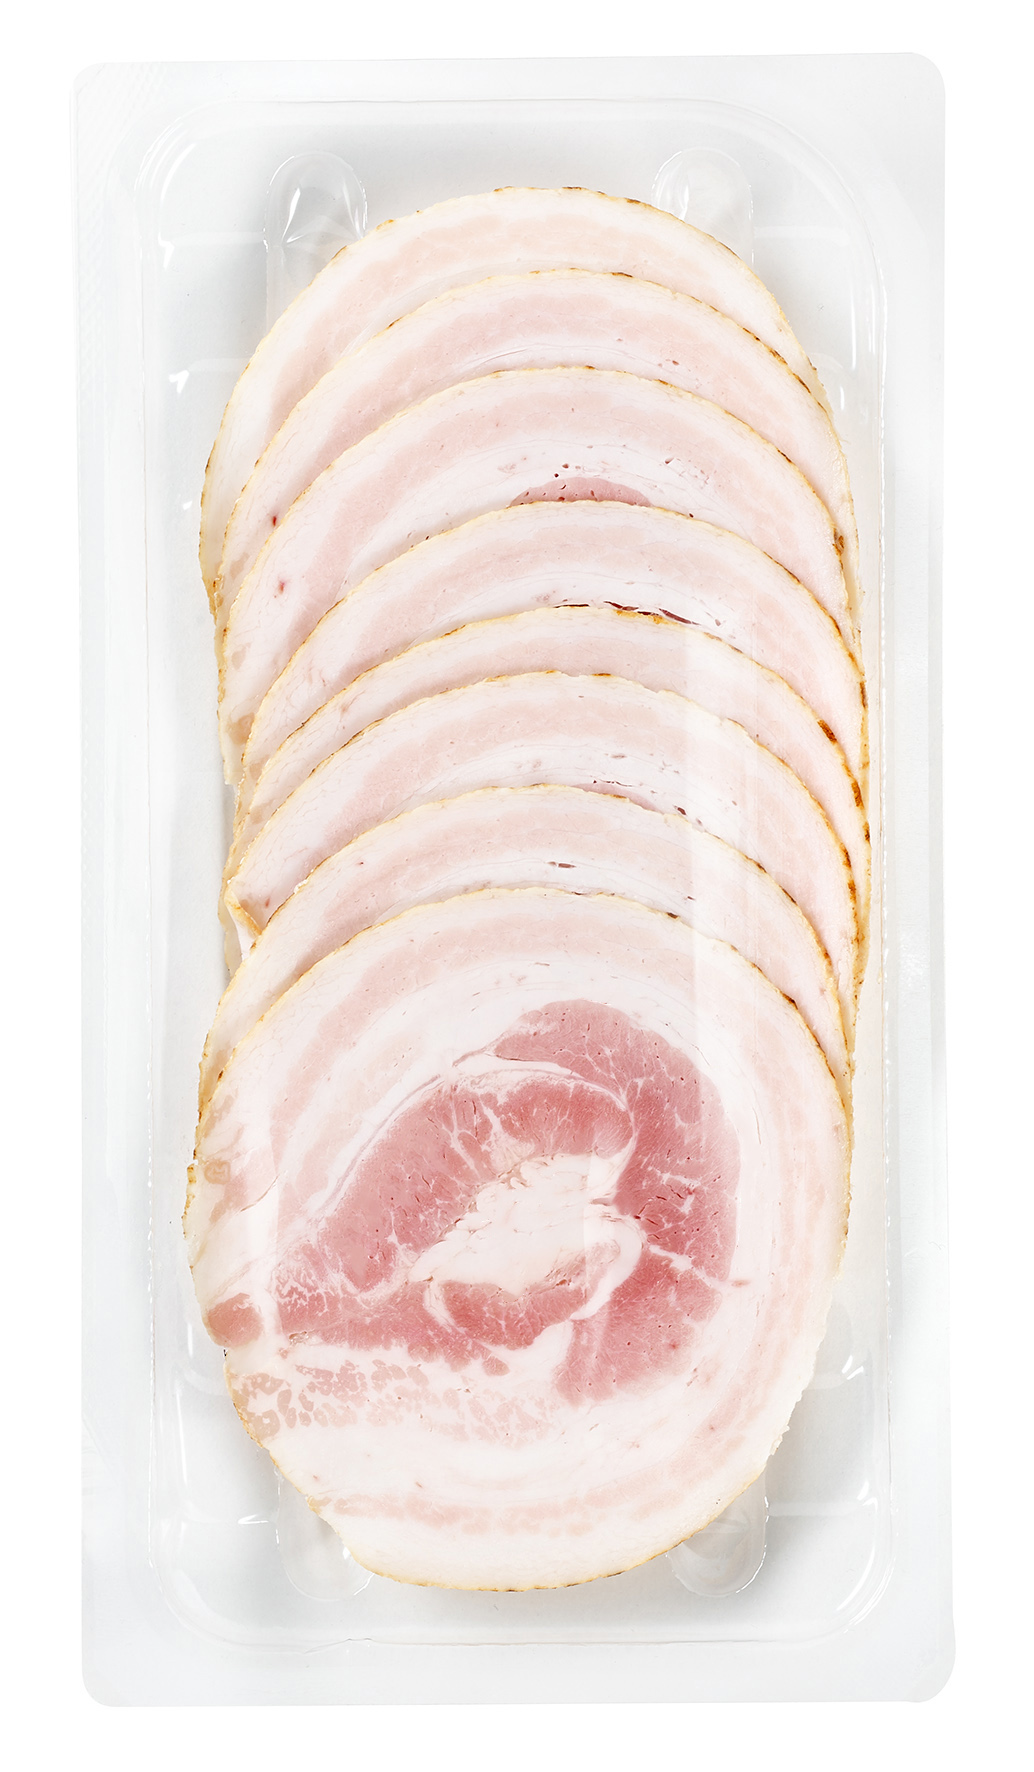 Baked Rolled  Bacon Sliced Poland manufacturer Kaminiarz package